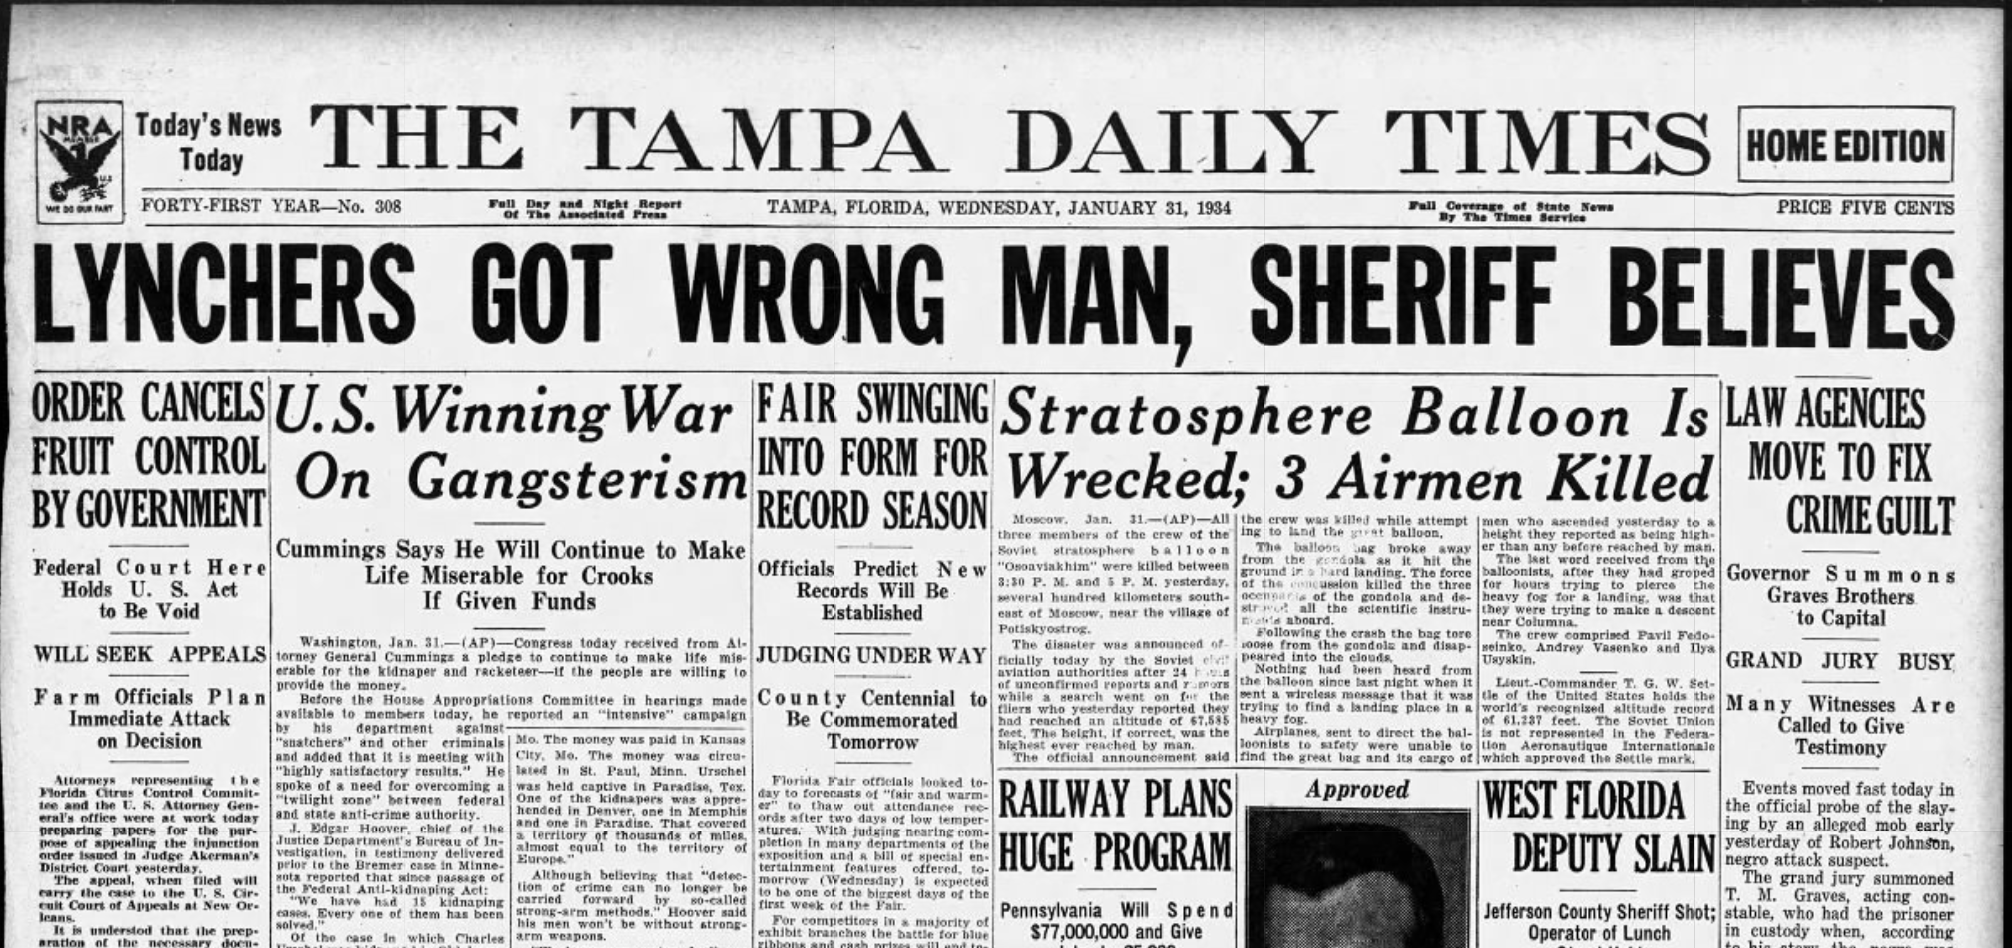 A newspaper clipping of the front page of the Tampa Times on Jan. 31, 1934.